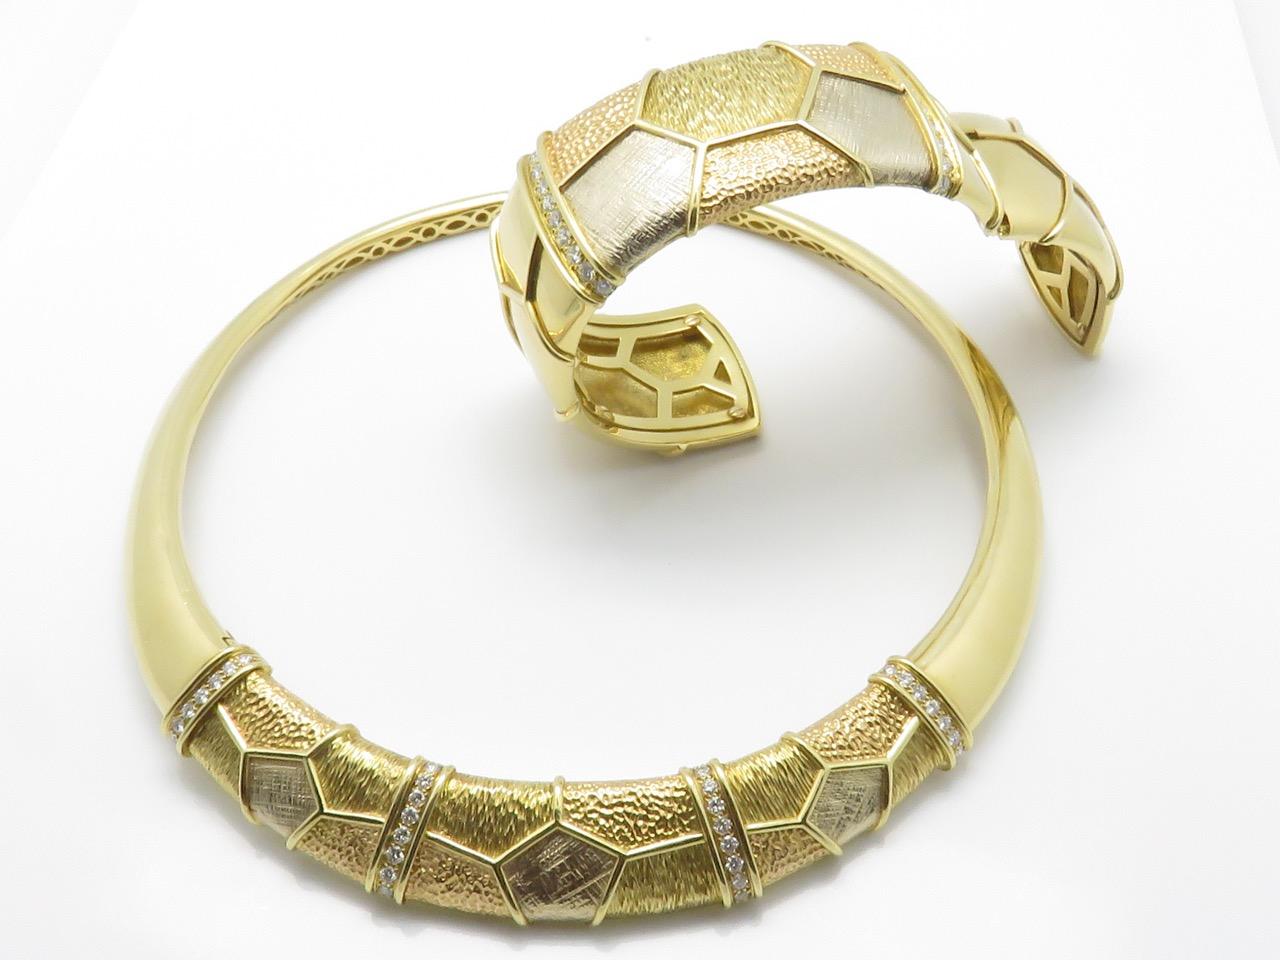 Set of necklace and large rigid bracelet made of different shades of 18k gold.
center parts have been mated into geometrical designs each separated by diamond lines.
Necklace and bracelet signed V C A 750
French assay marks.
Circa